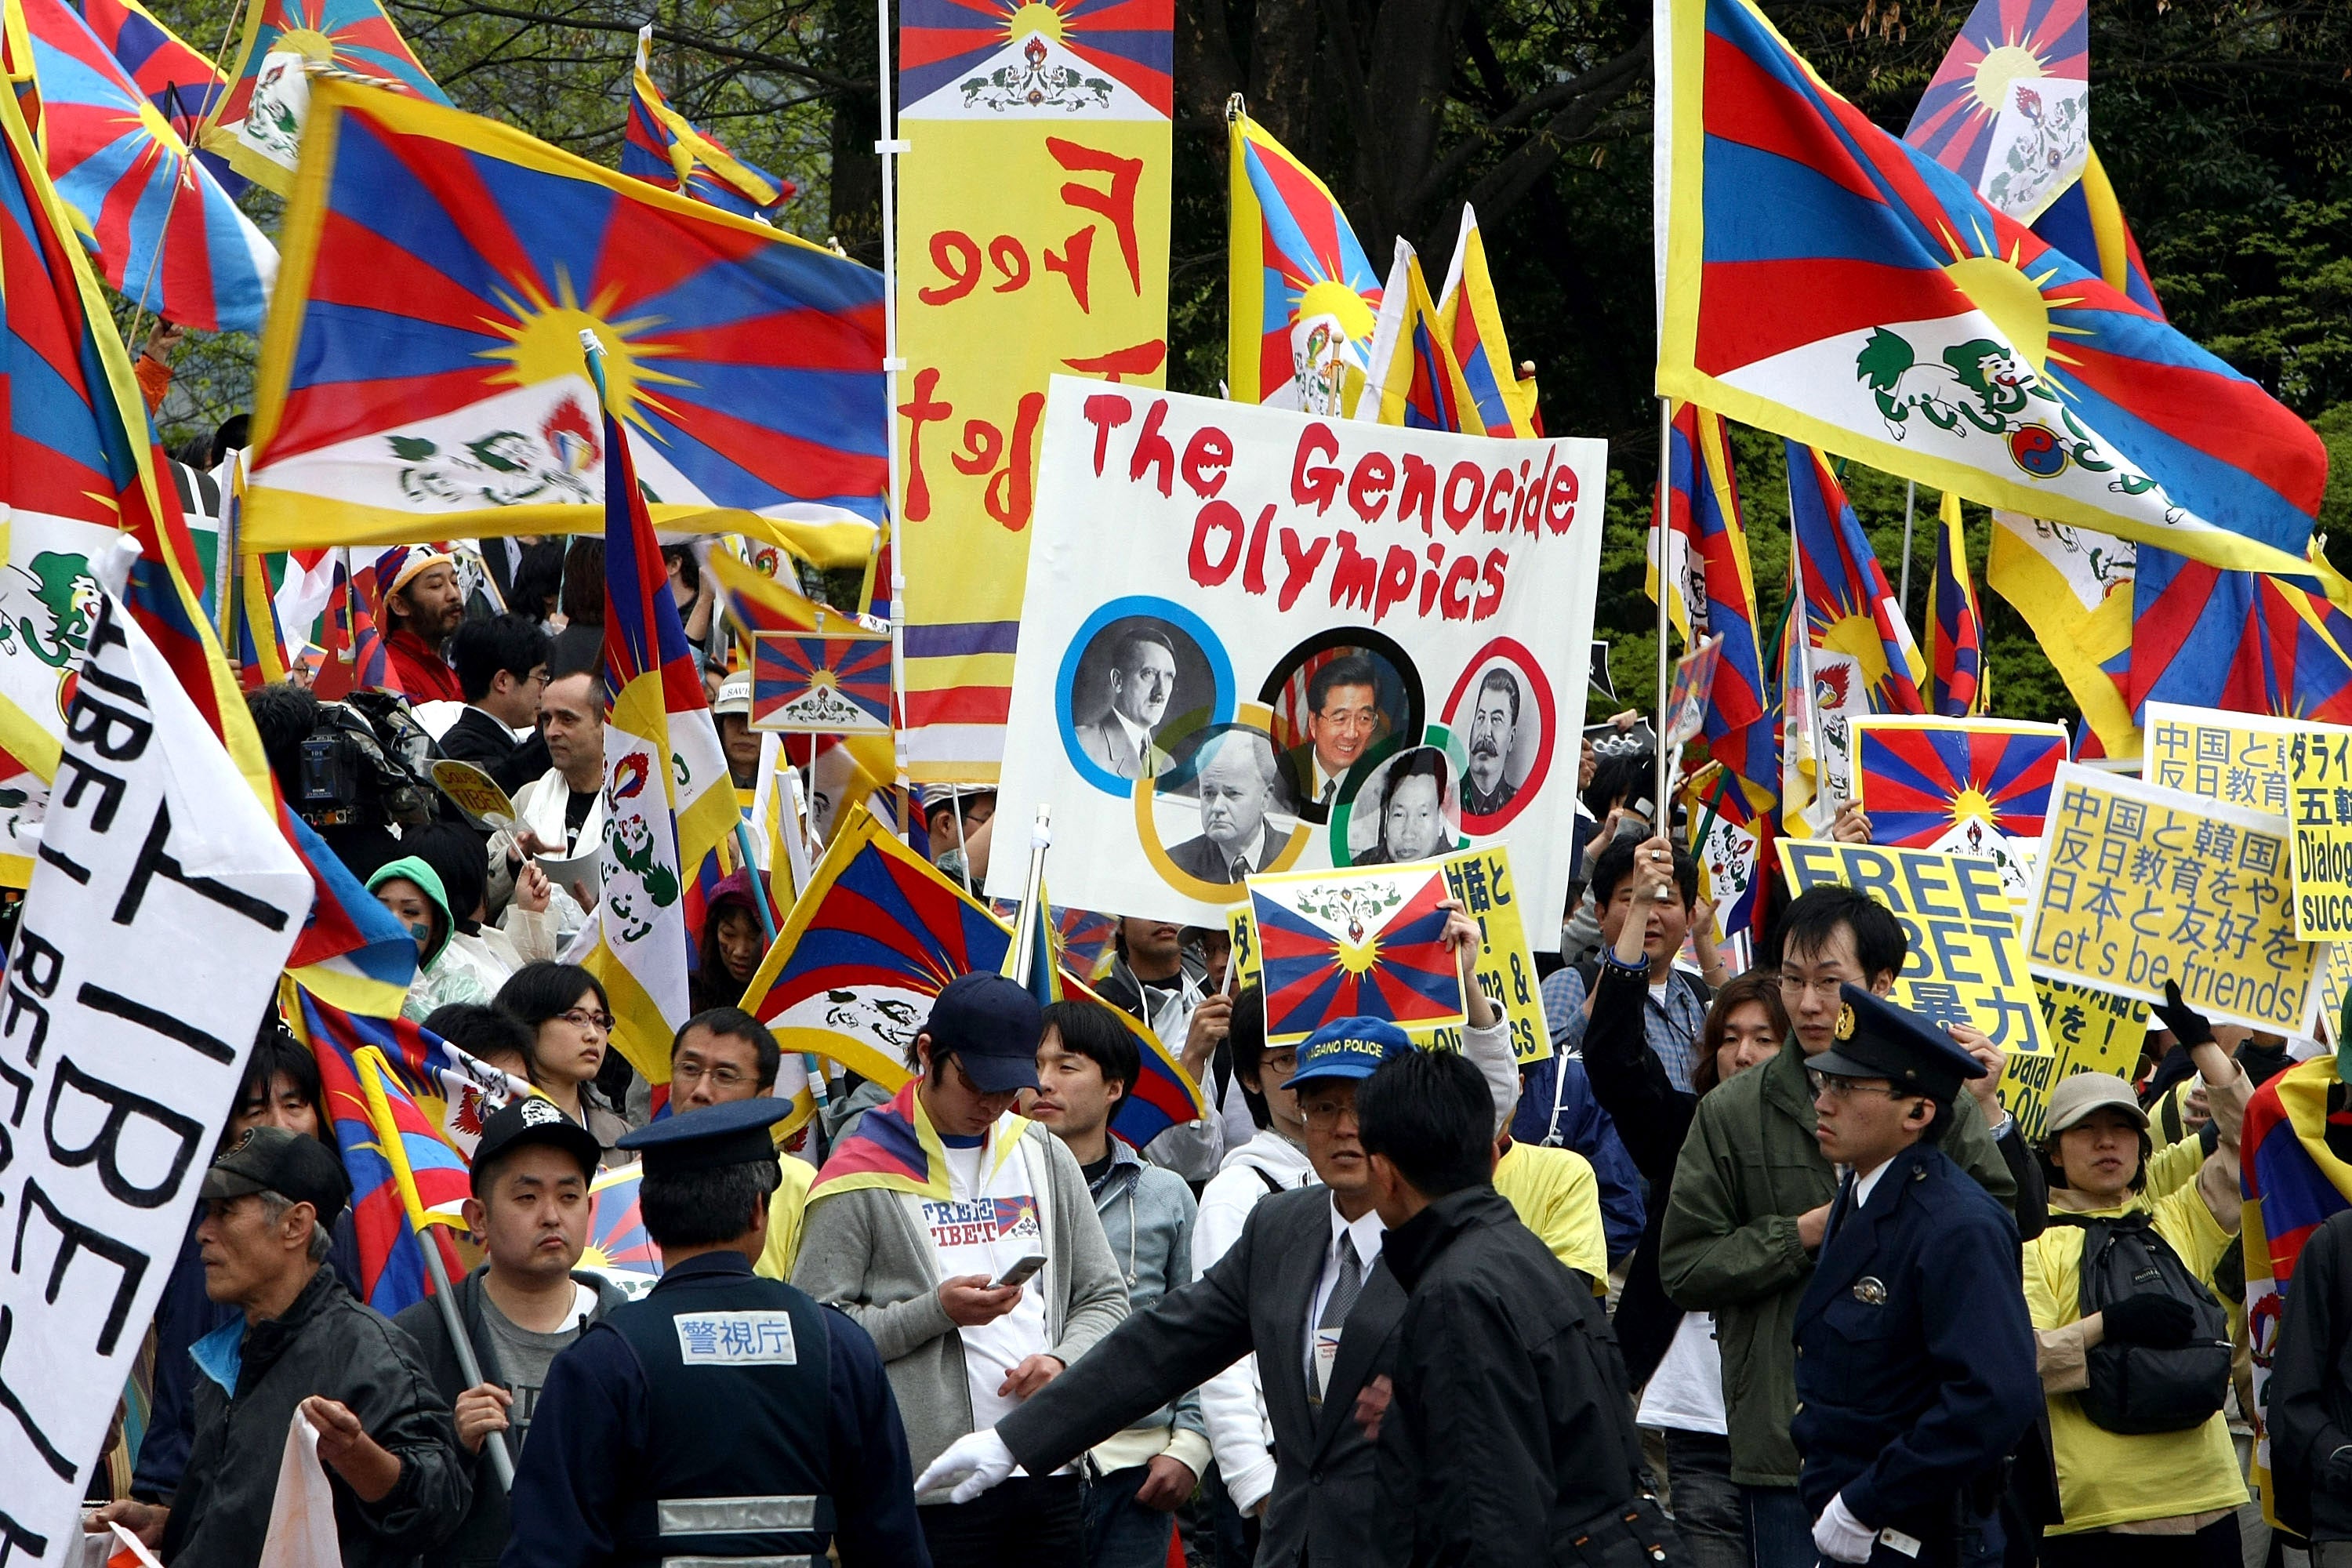 Protesters marching in solidarity with Tibet during the 2008 Olympic torch relay in Nagano, Japan